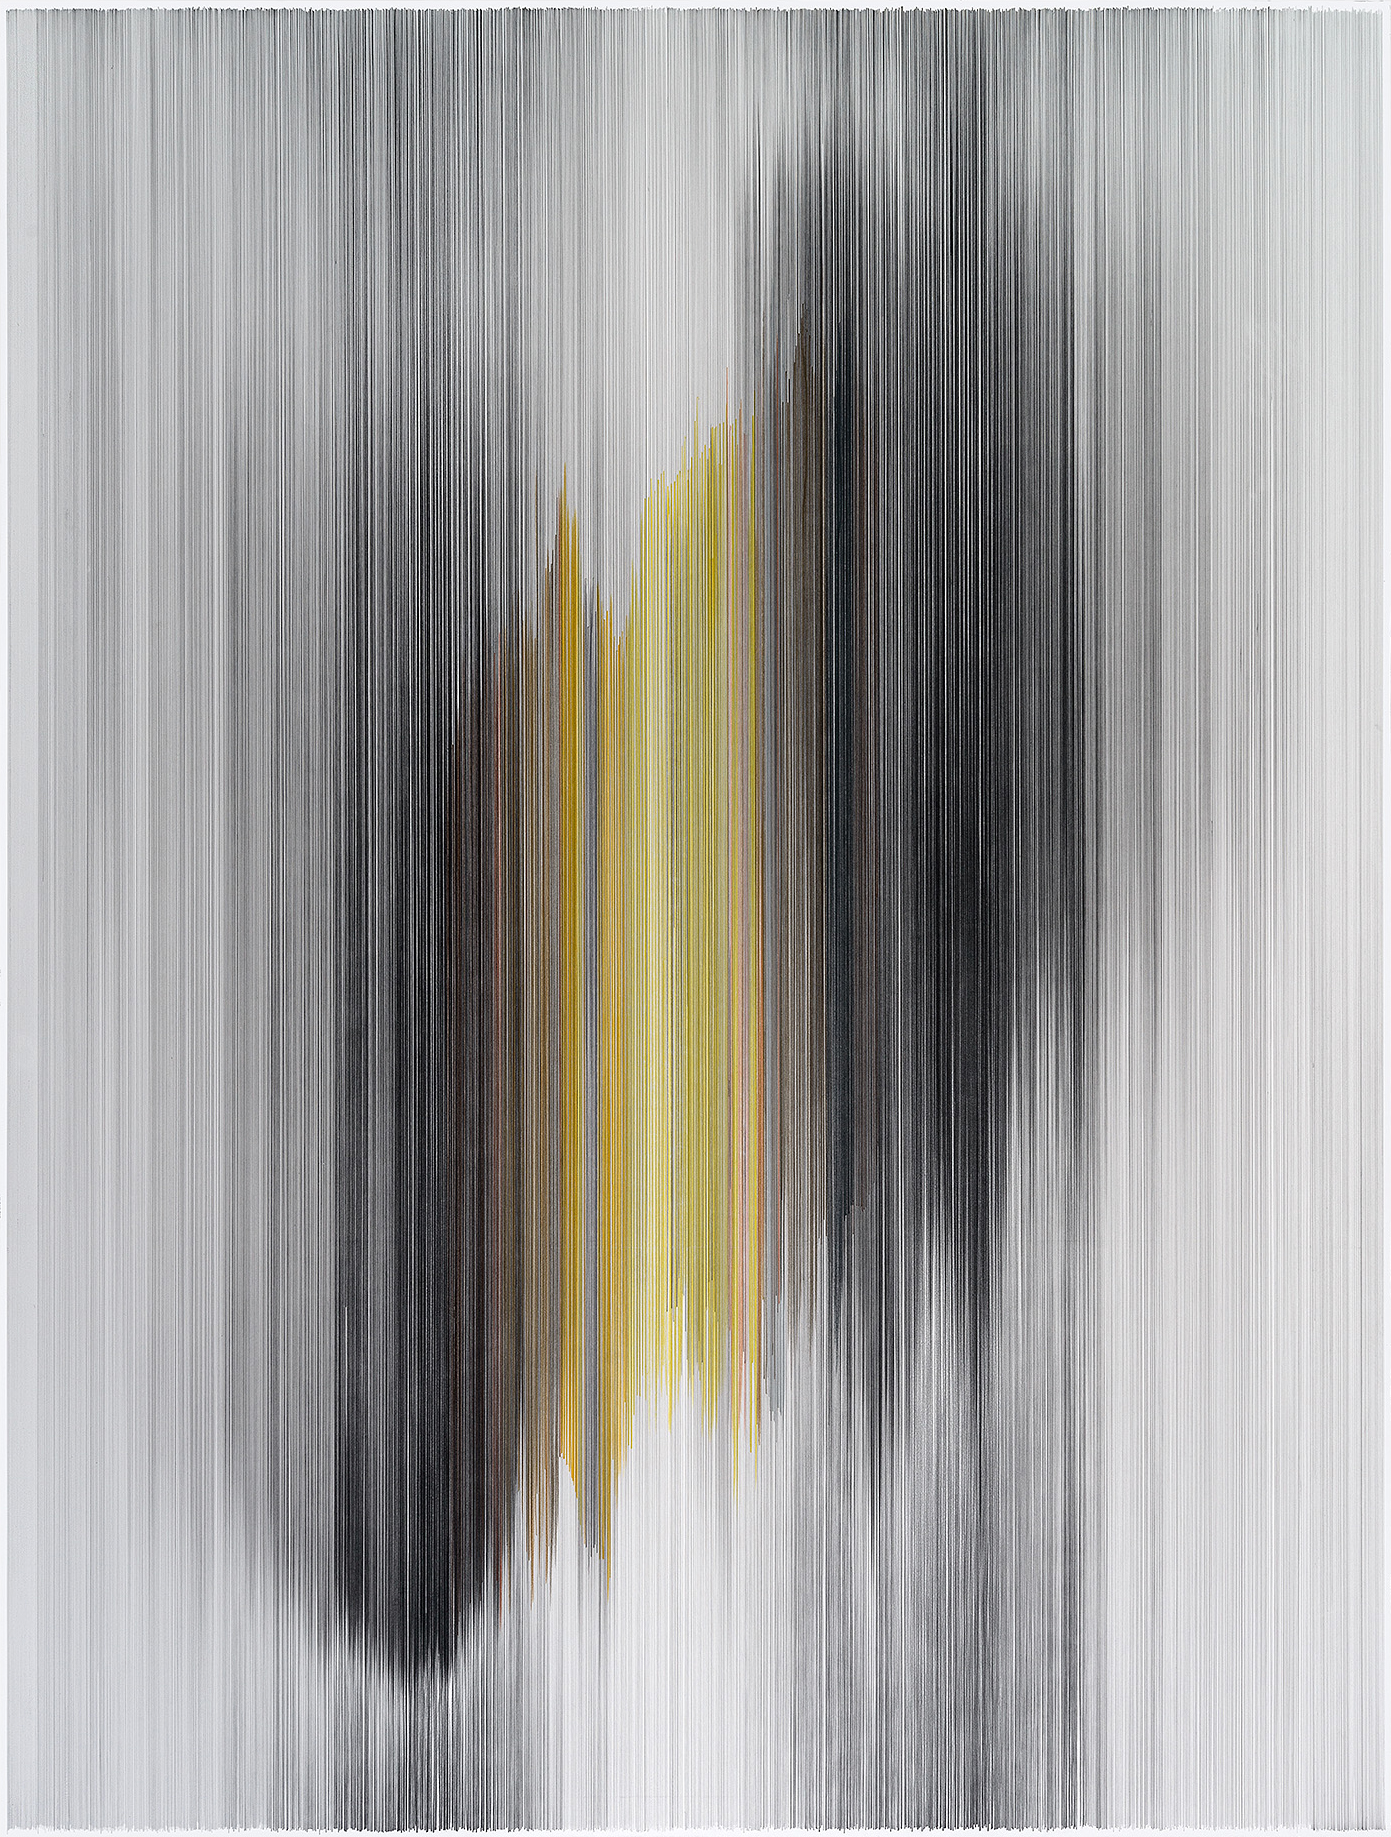    parallel 45   2014 graphite and colored pencil on mat board 80 x 60 inches 